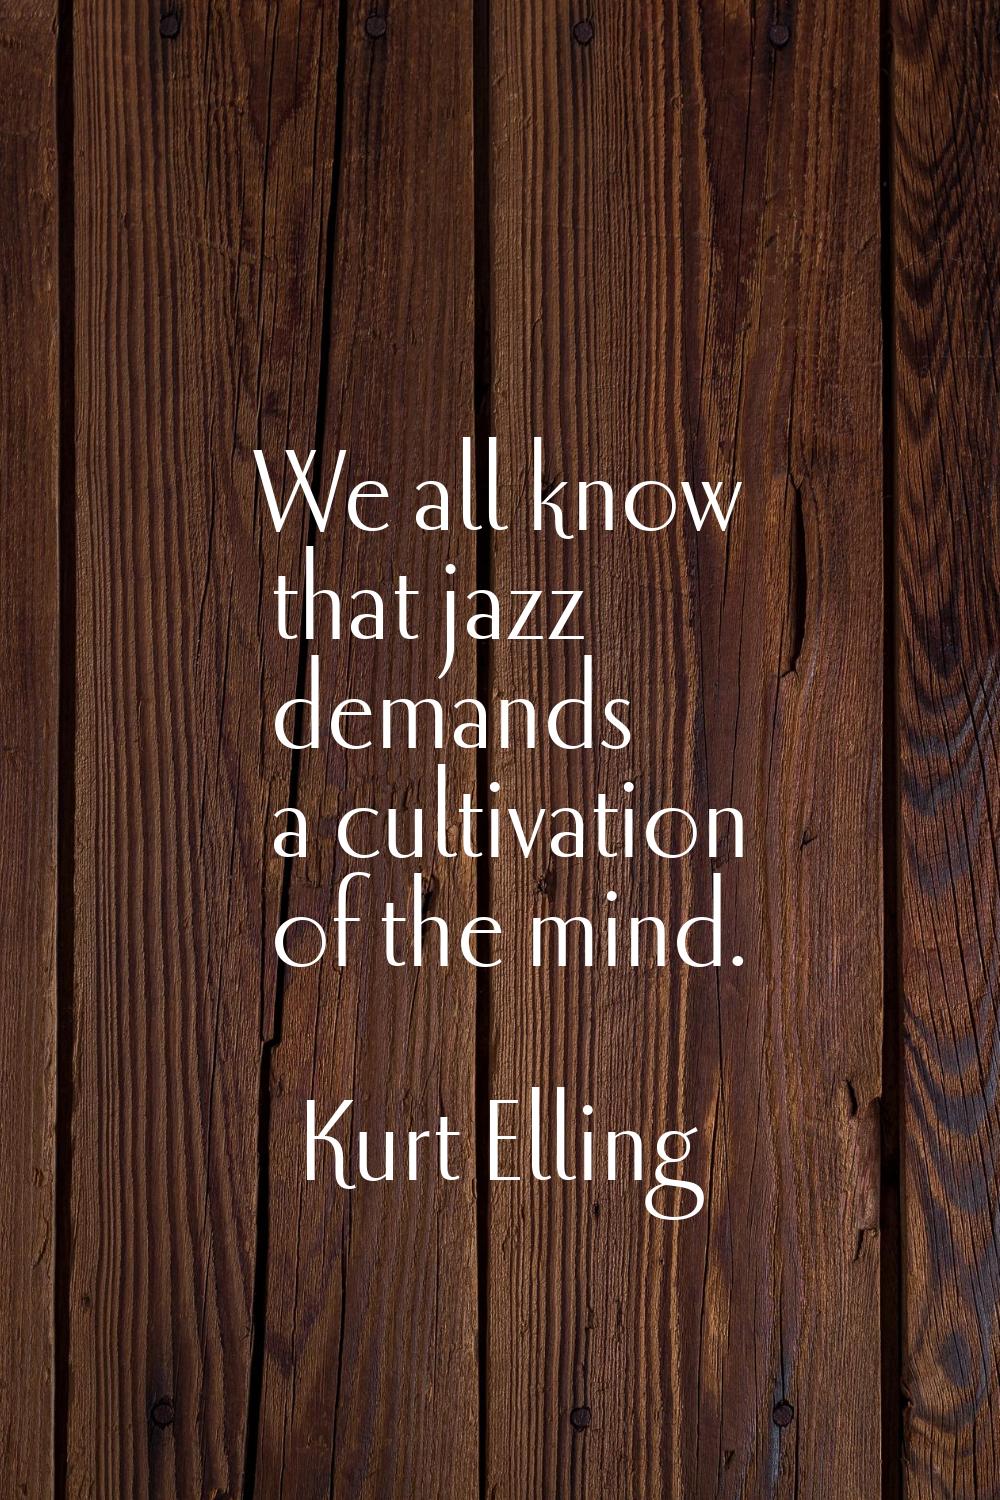 We all know that jazz demands a cultivation of the mind.